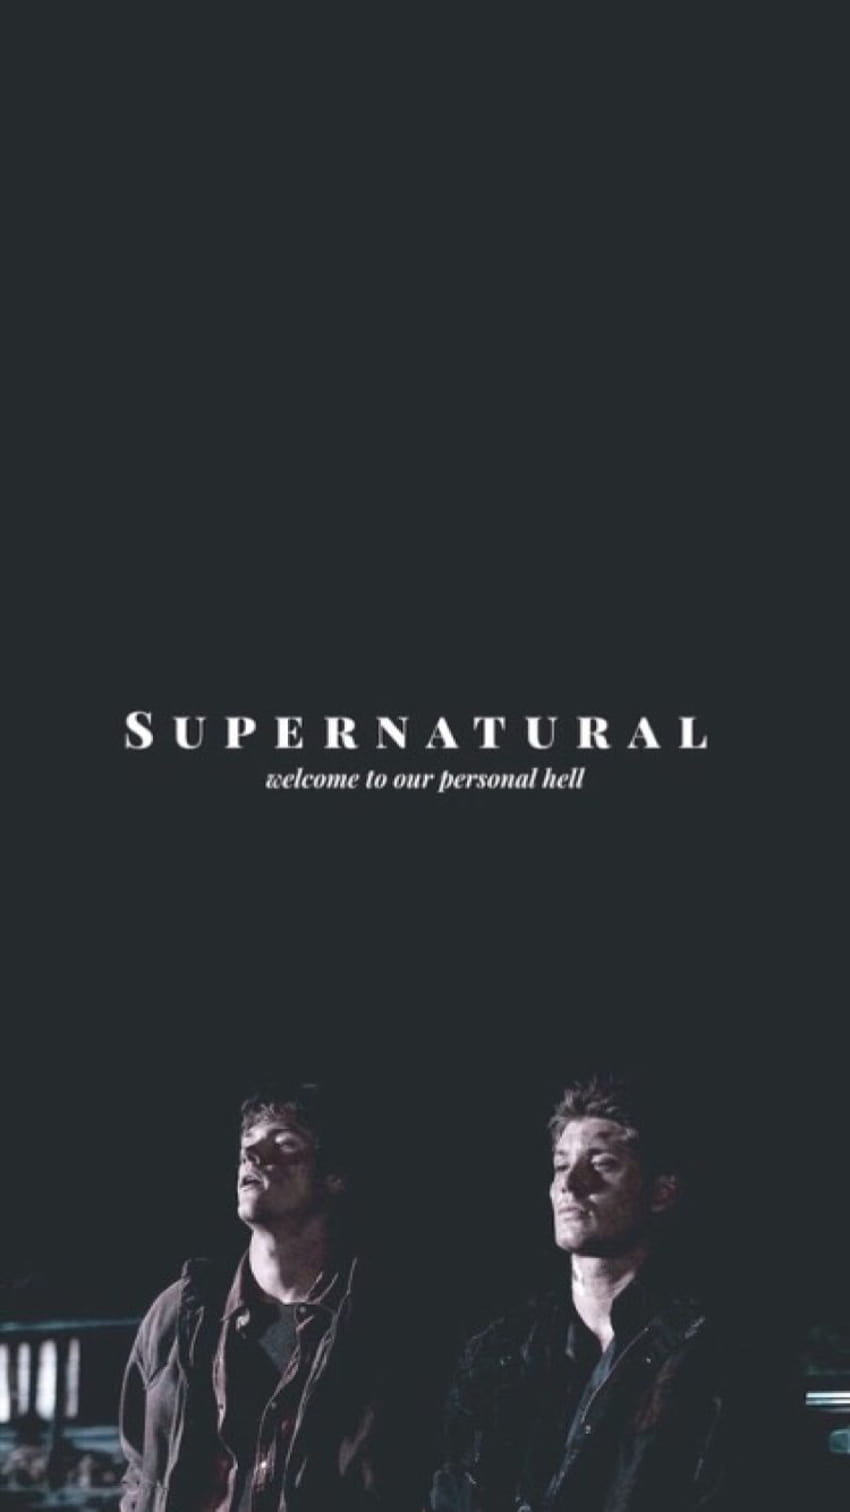 imagine with Dean Winchester, supernatural iphone HD phone wallpaper